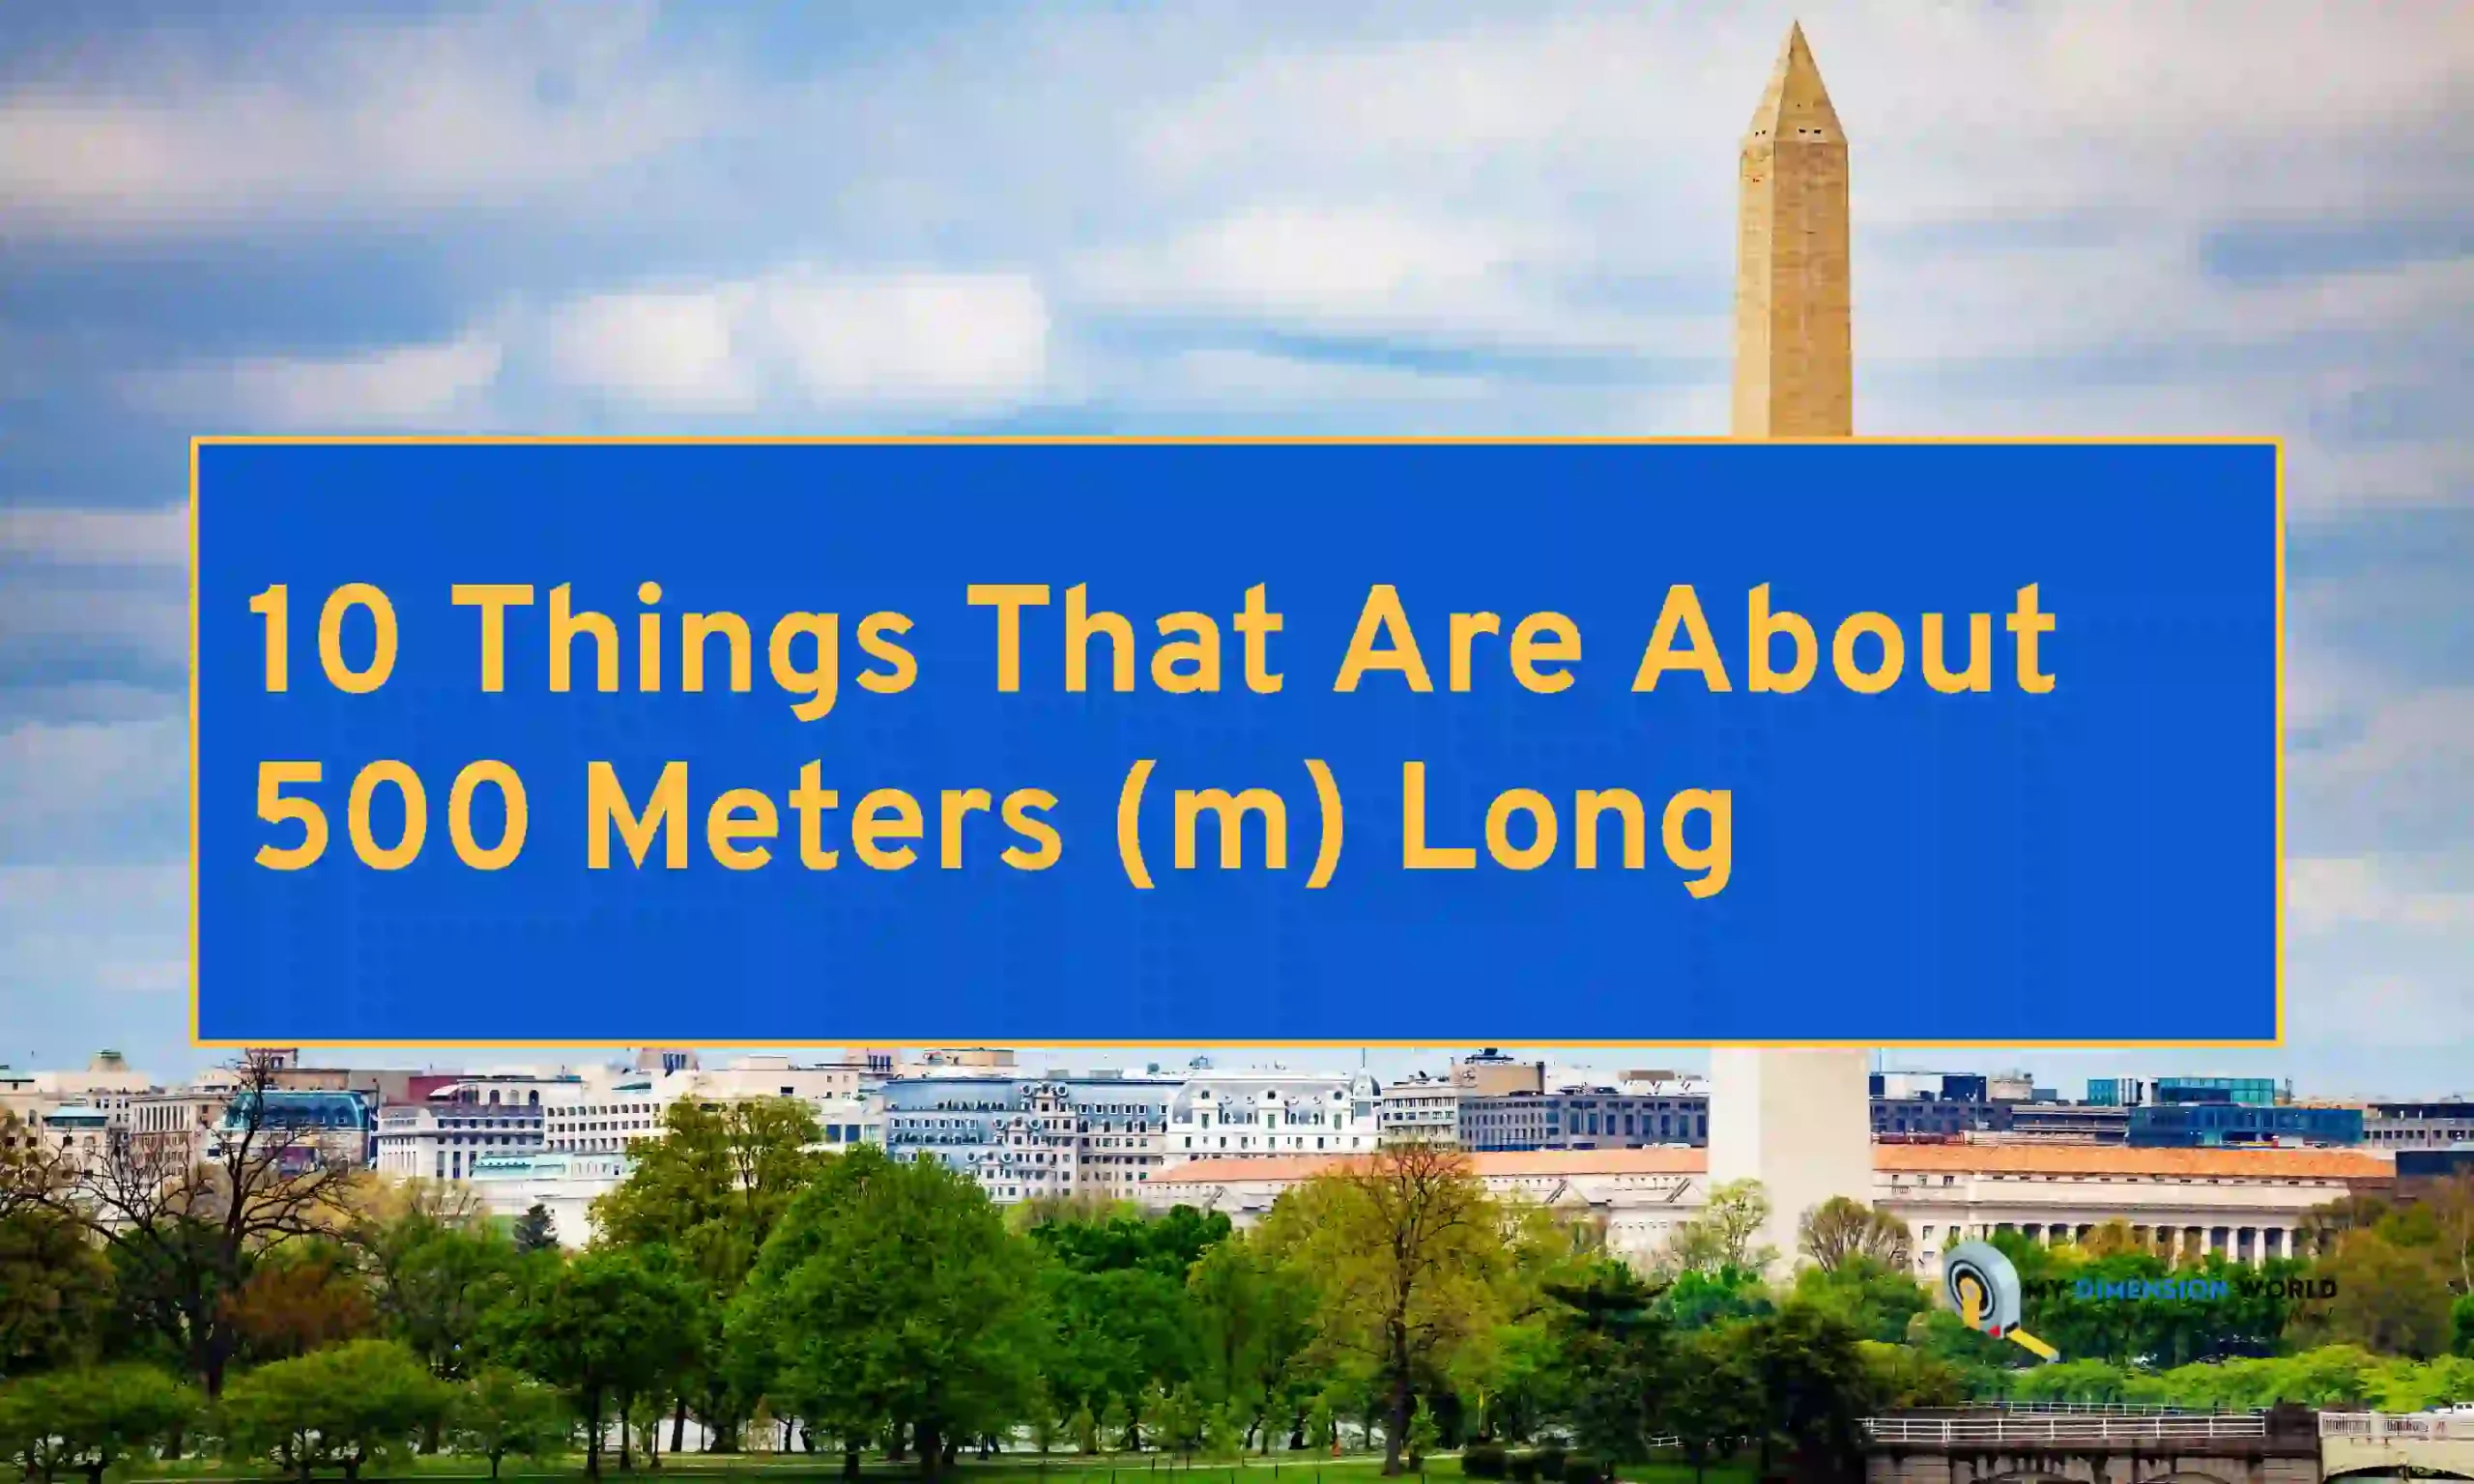 10 Things That Are About 500 Meters (m) Long